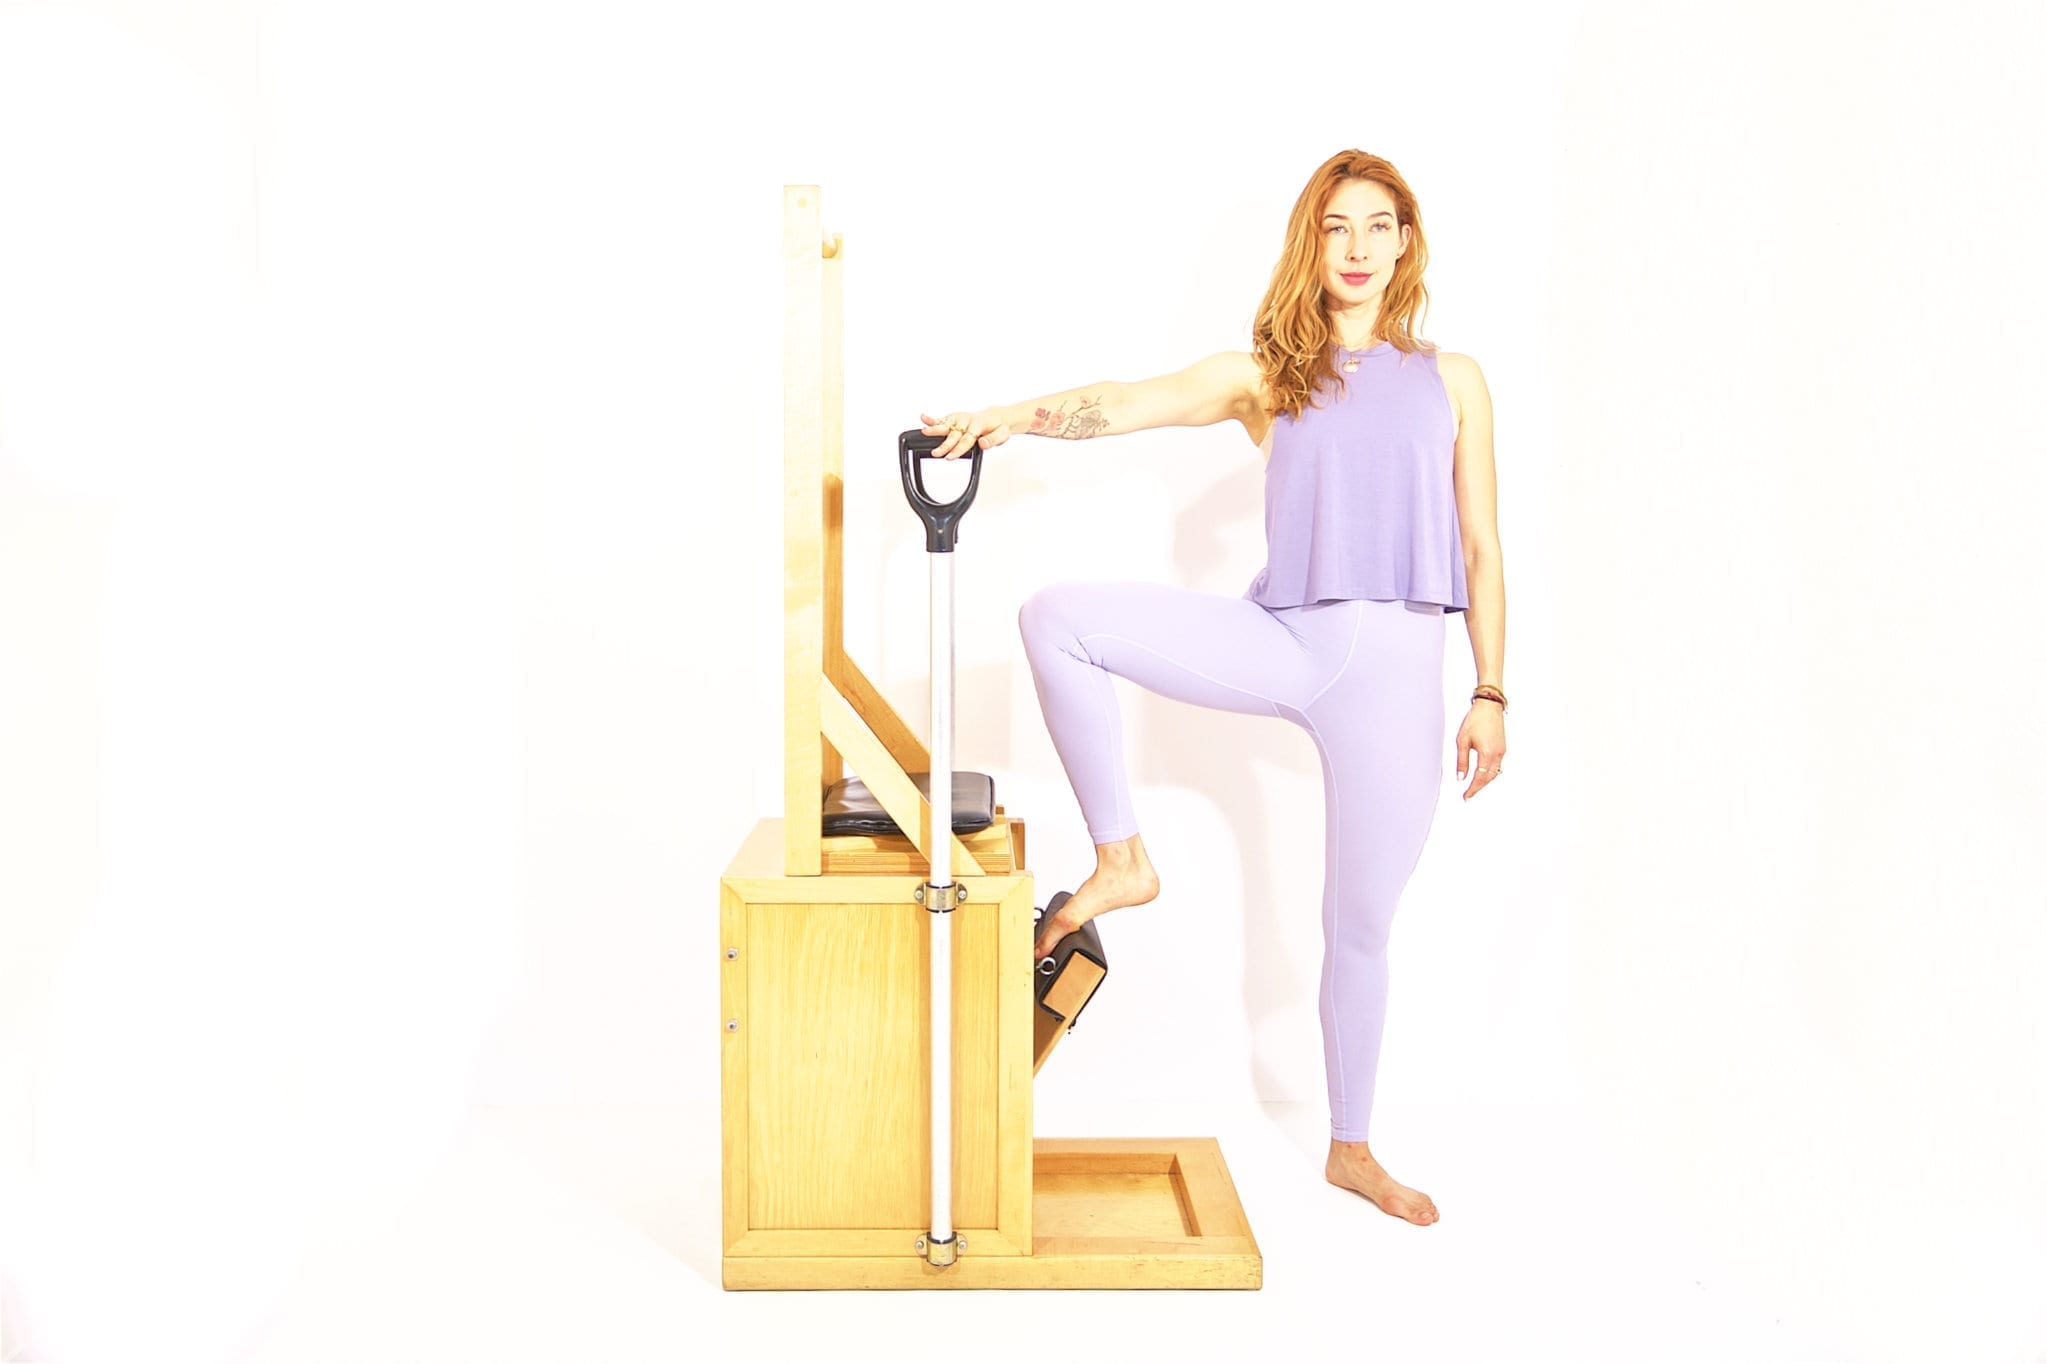 Press-Down-Side-on-the-High-Chair-Online-Pilates-Classes